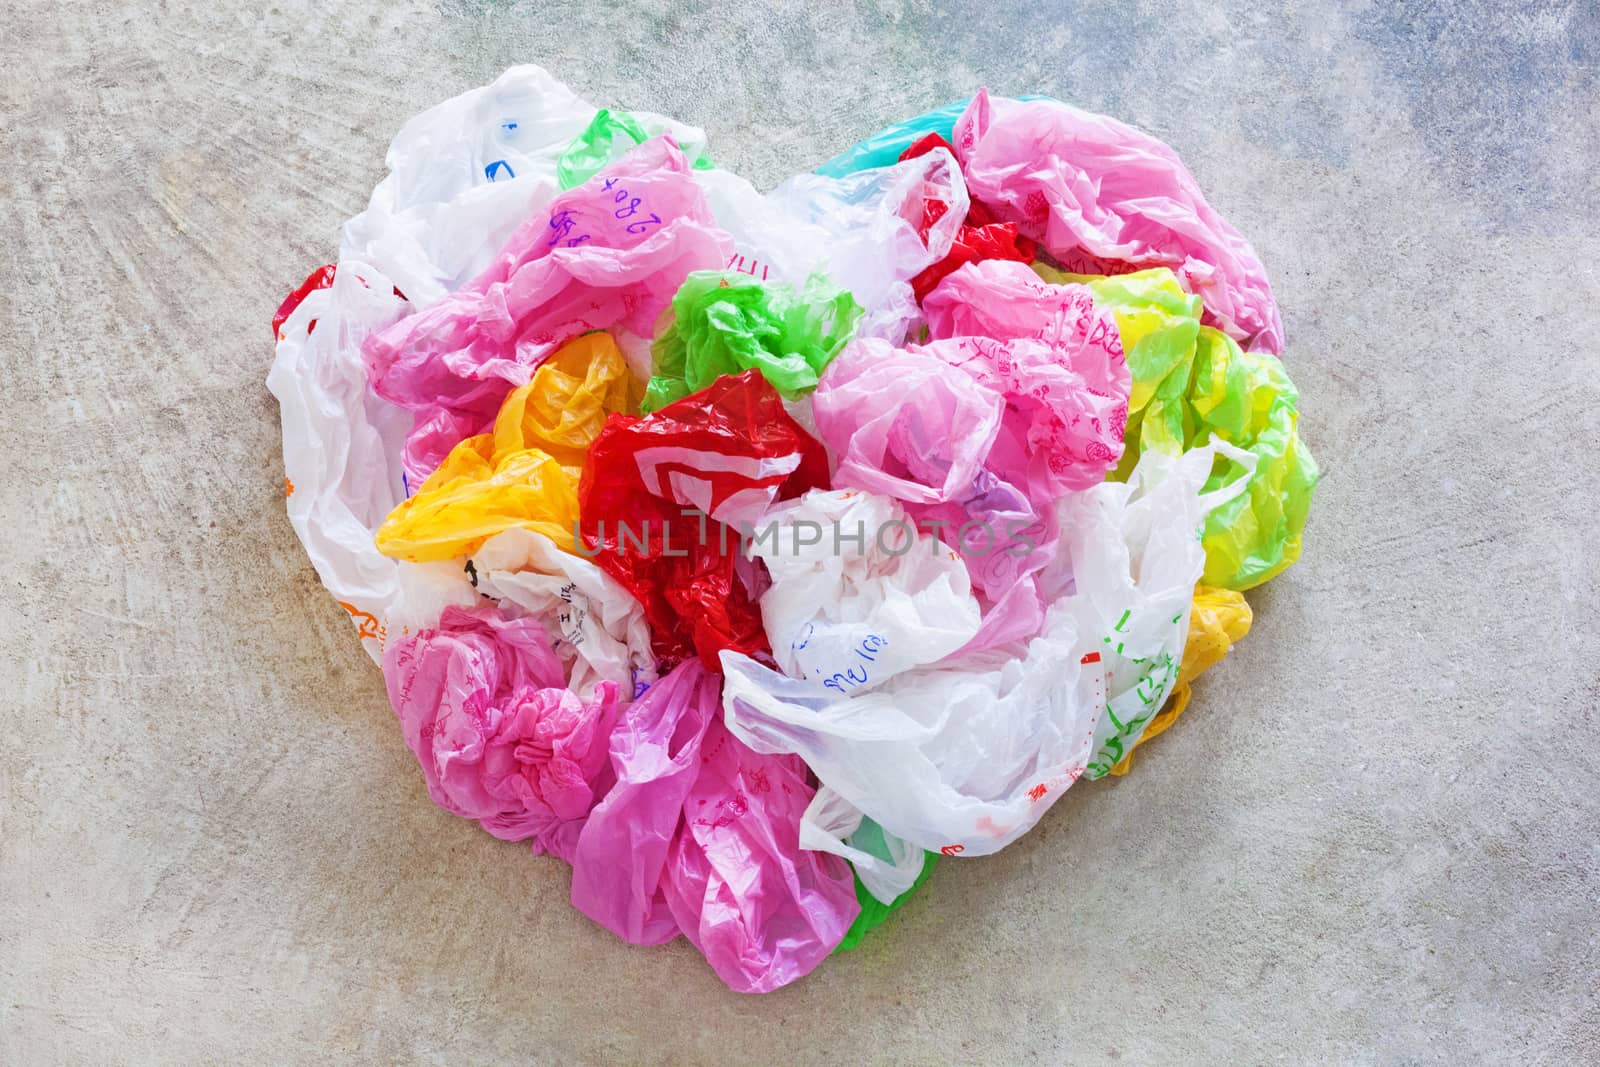 Colorful plastic bag on cement floor background. Heart Shape